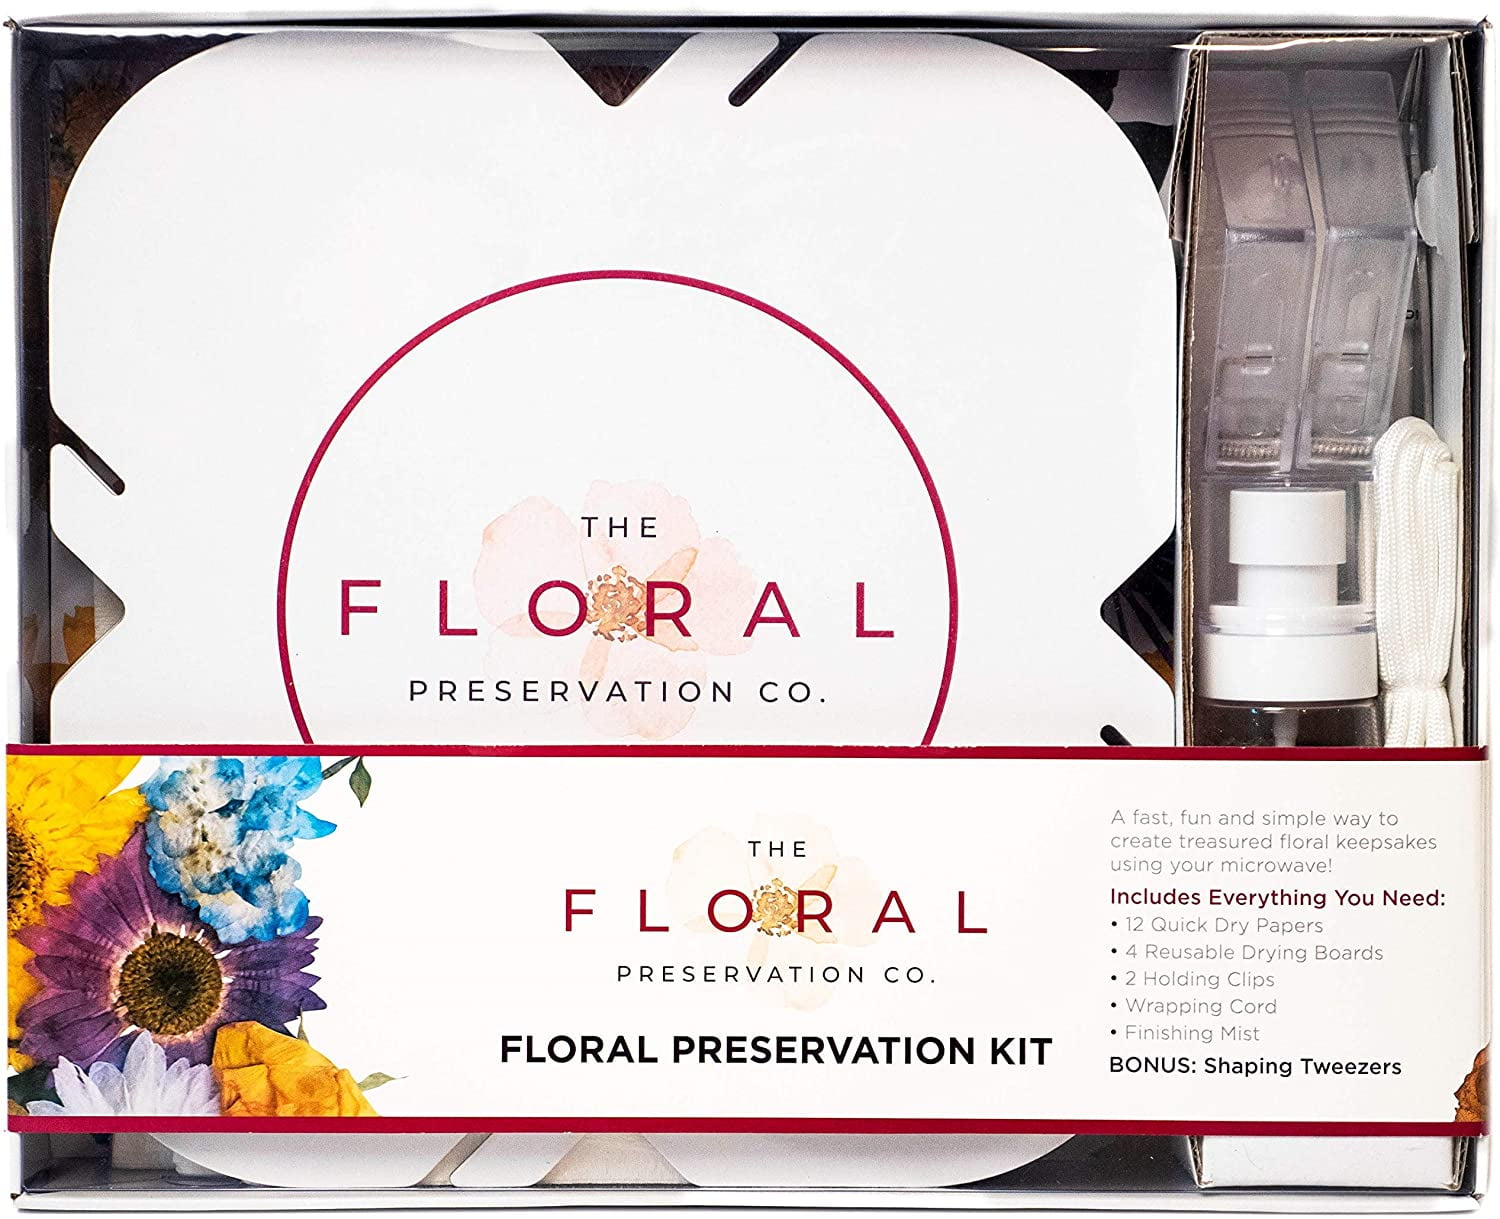 The Floral Preservation Co